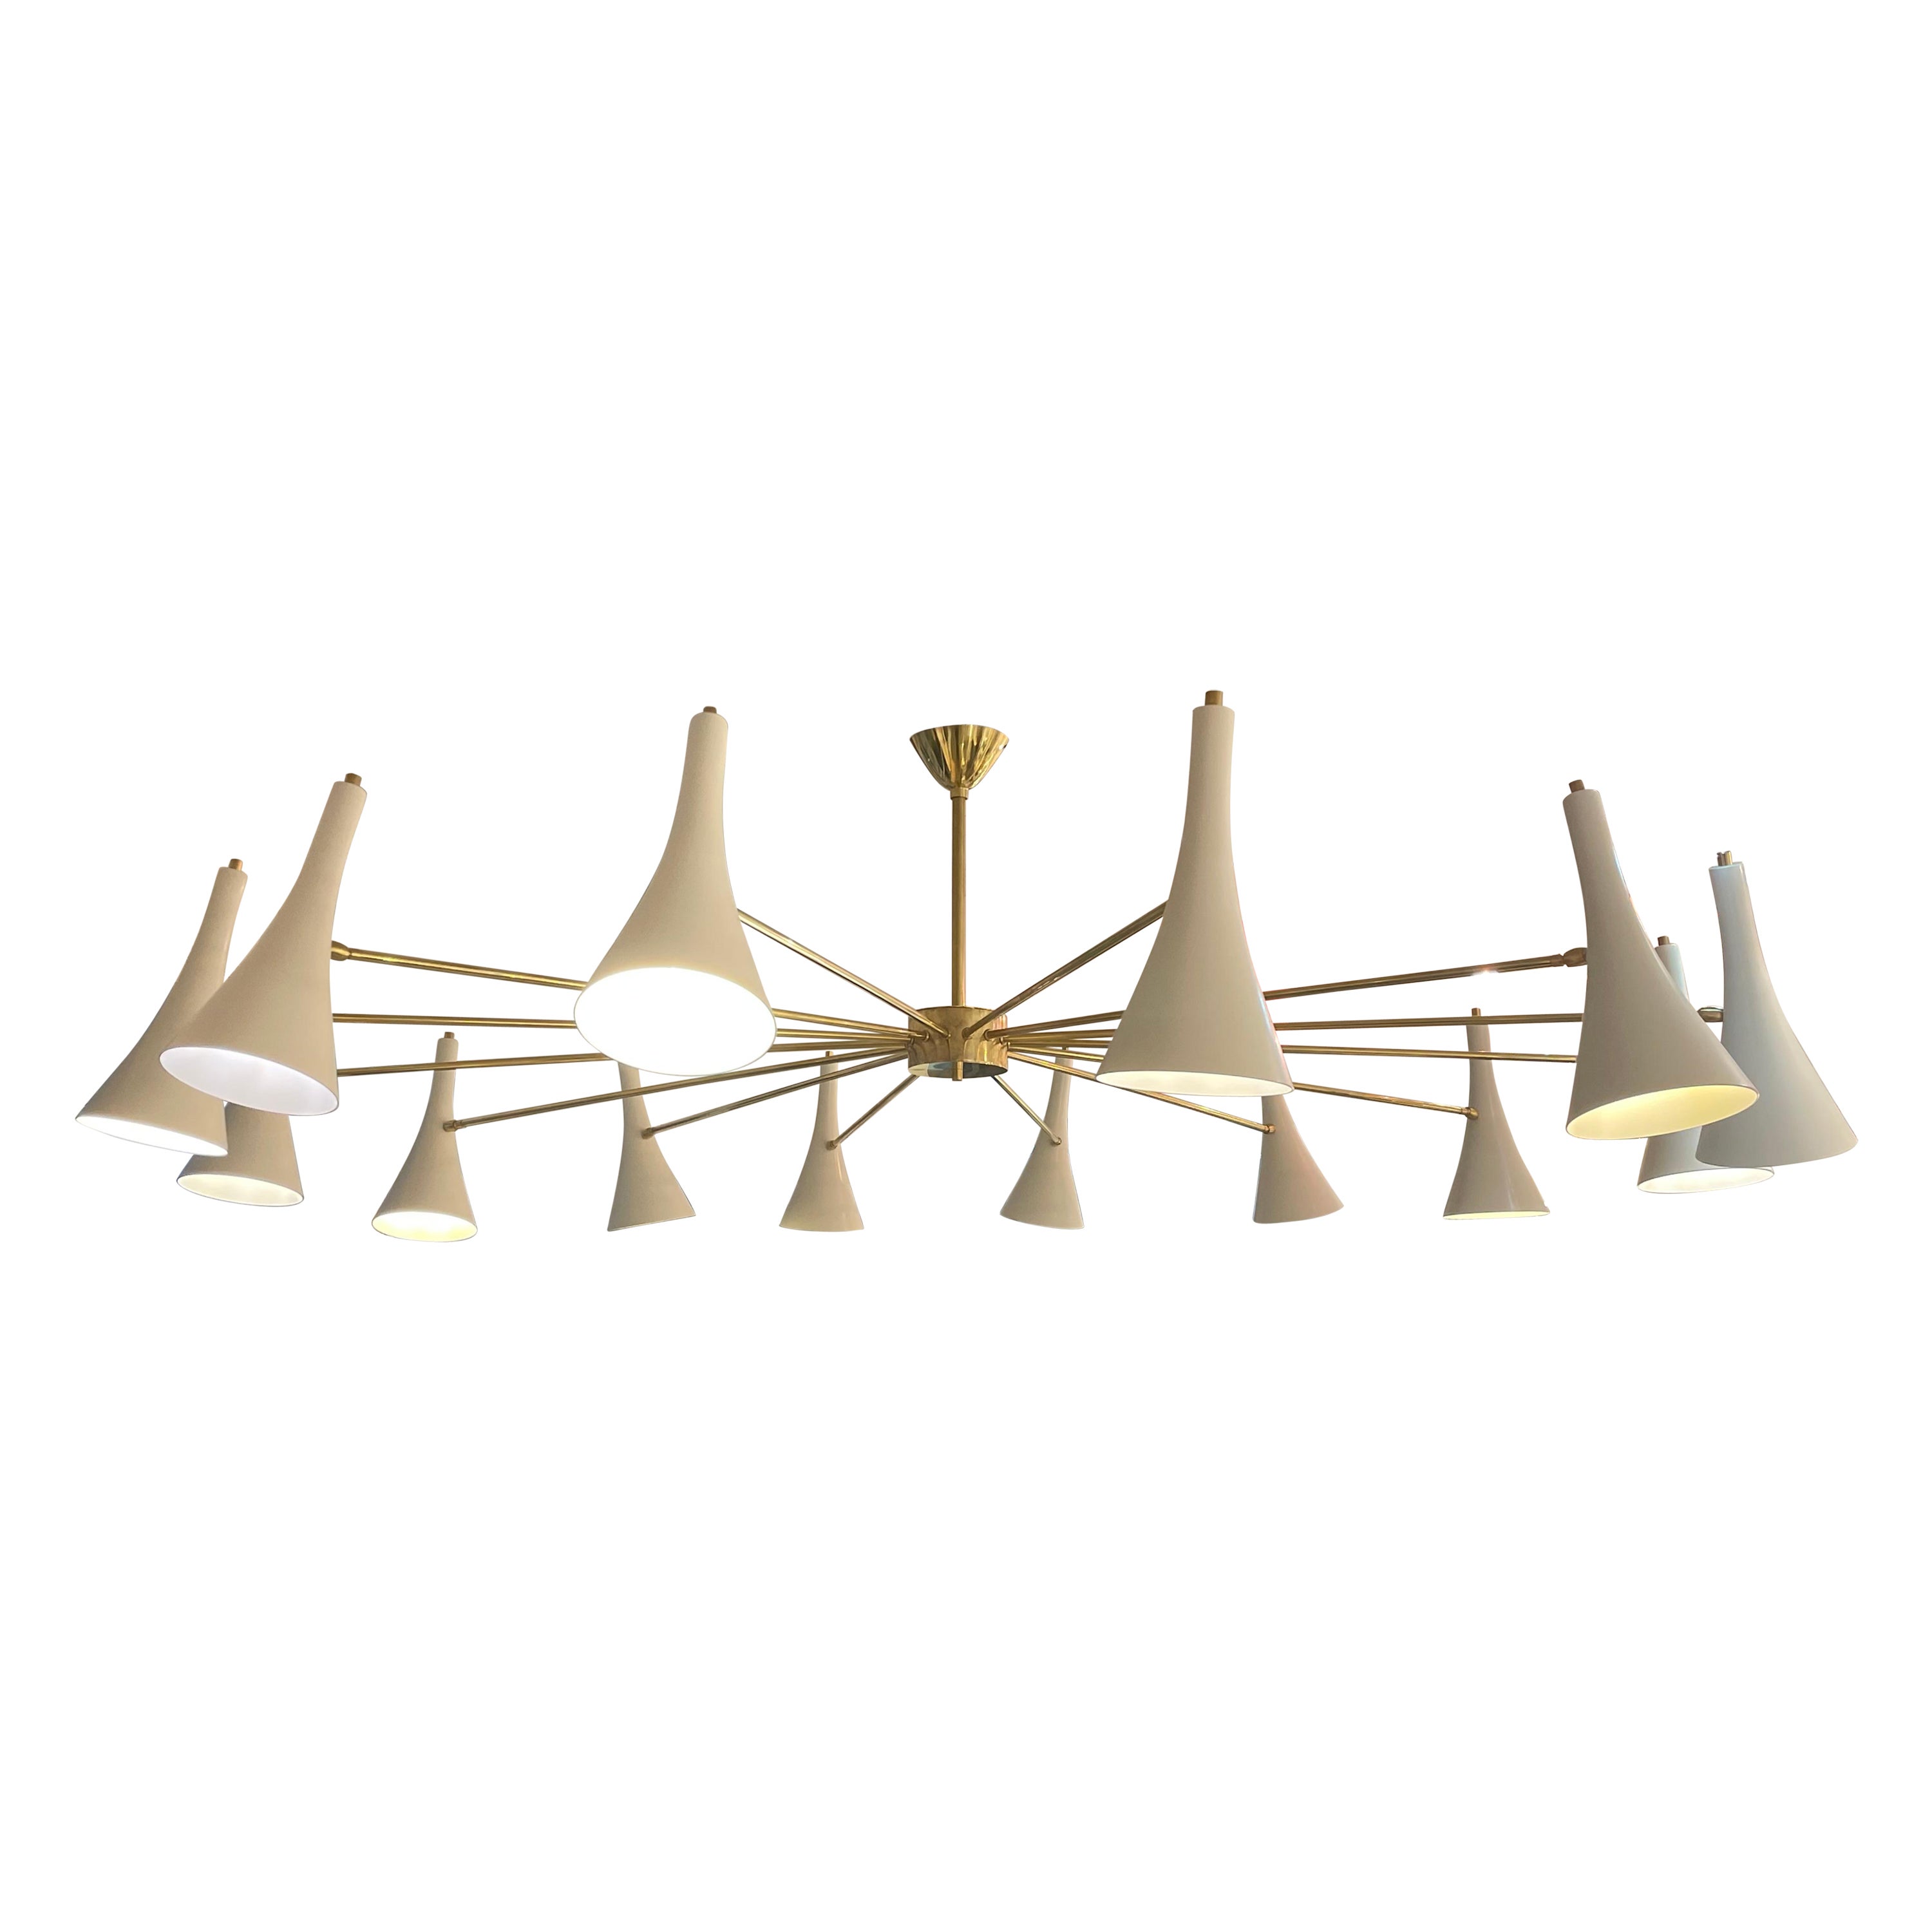 Italian Modernist Chandelier in Brass with 14 Arms, circa 1970 For Sale